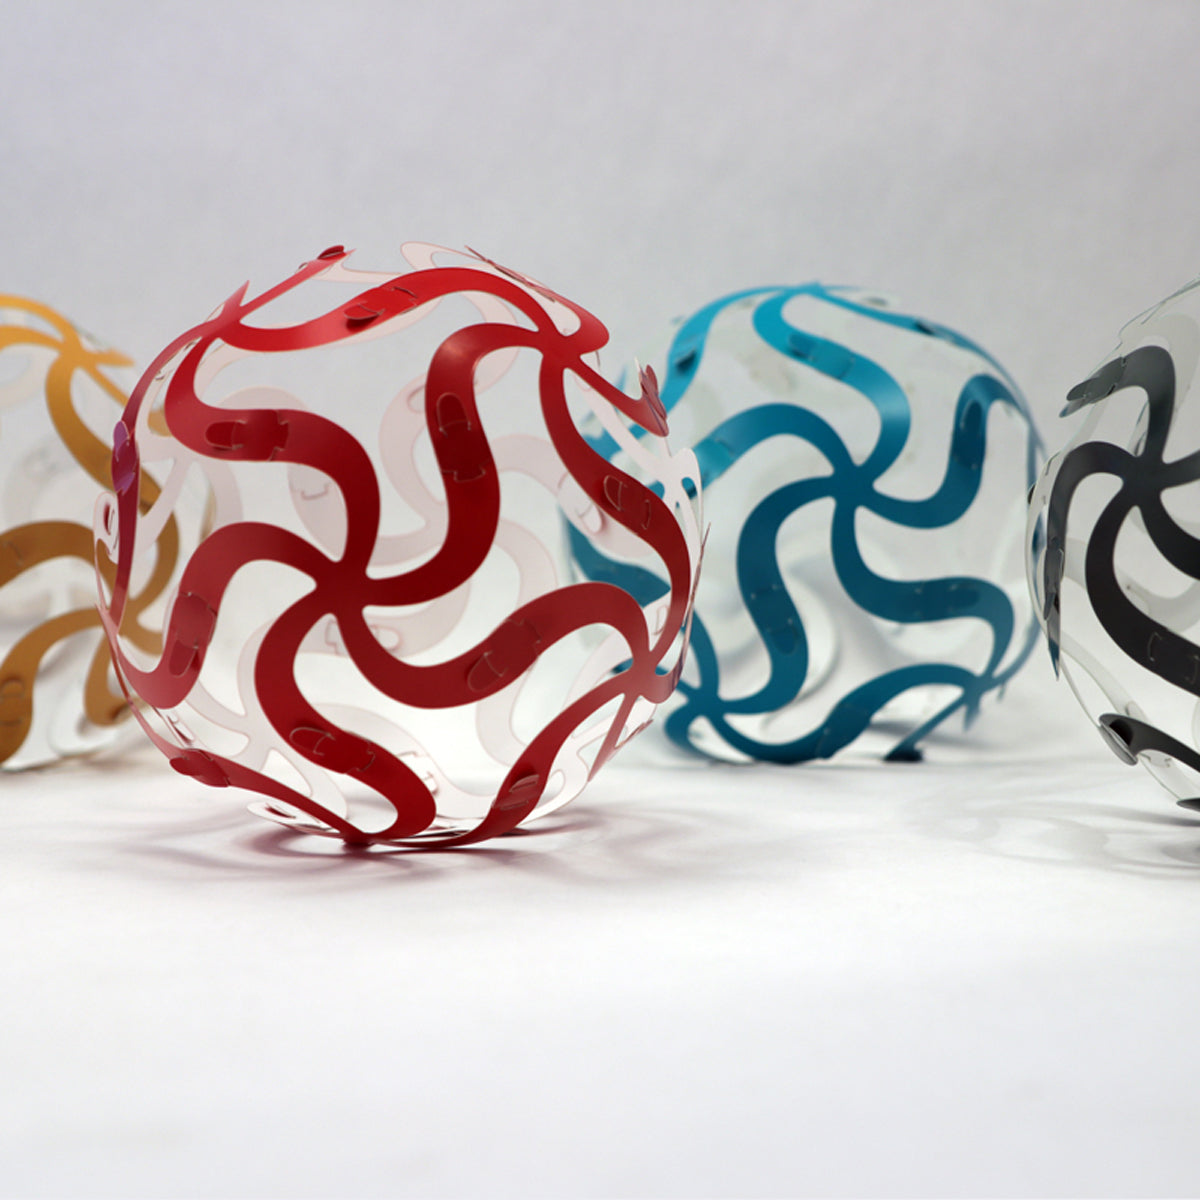 Red Curvahedra Woven Ball Puzzle Set